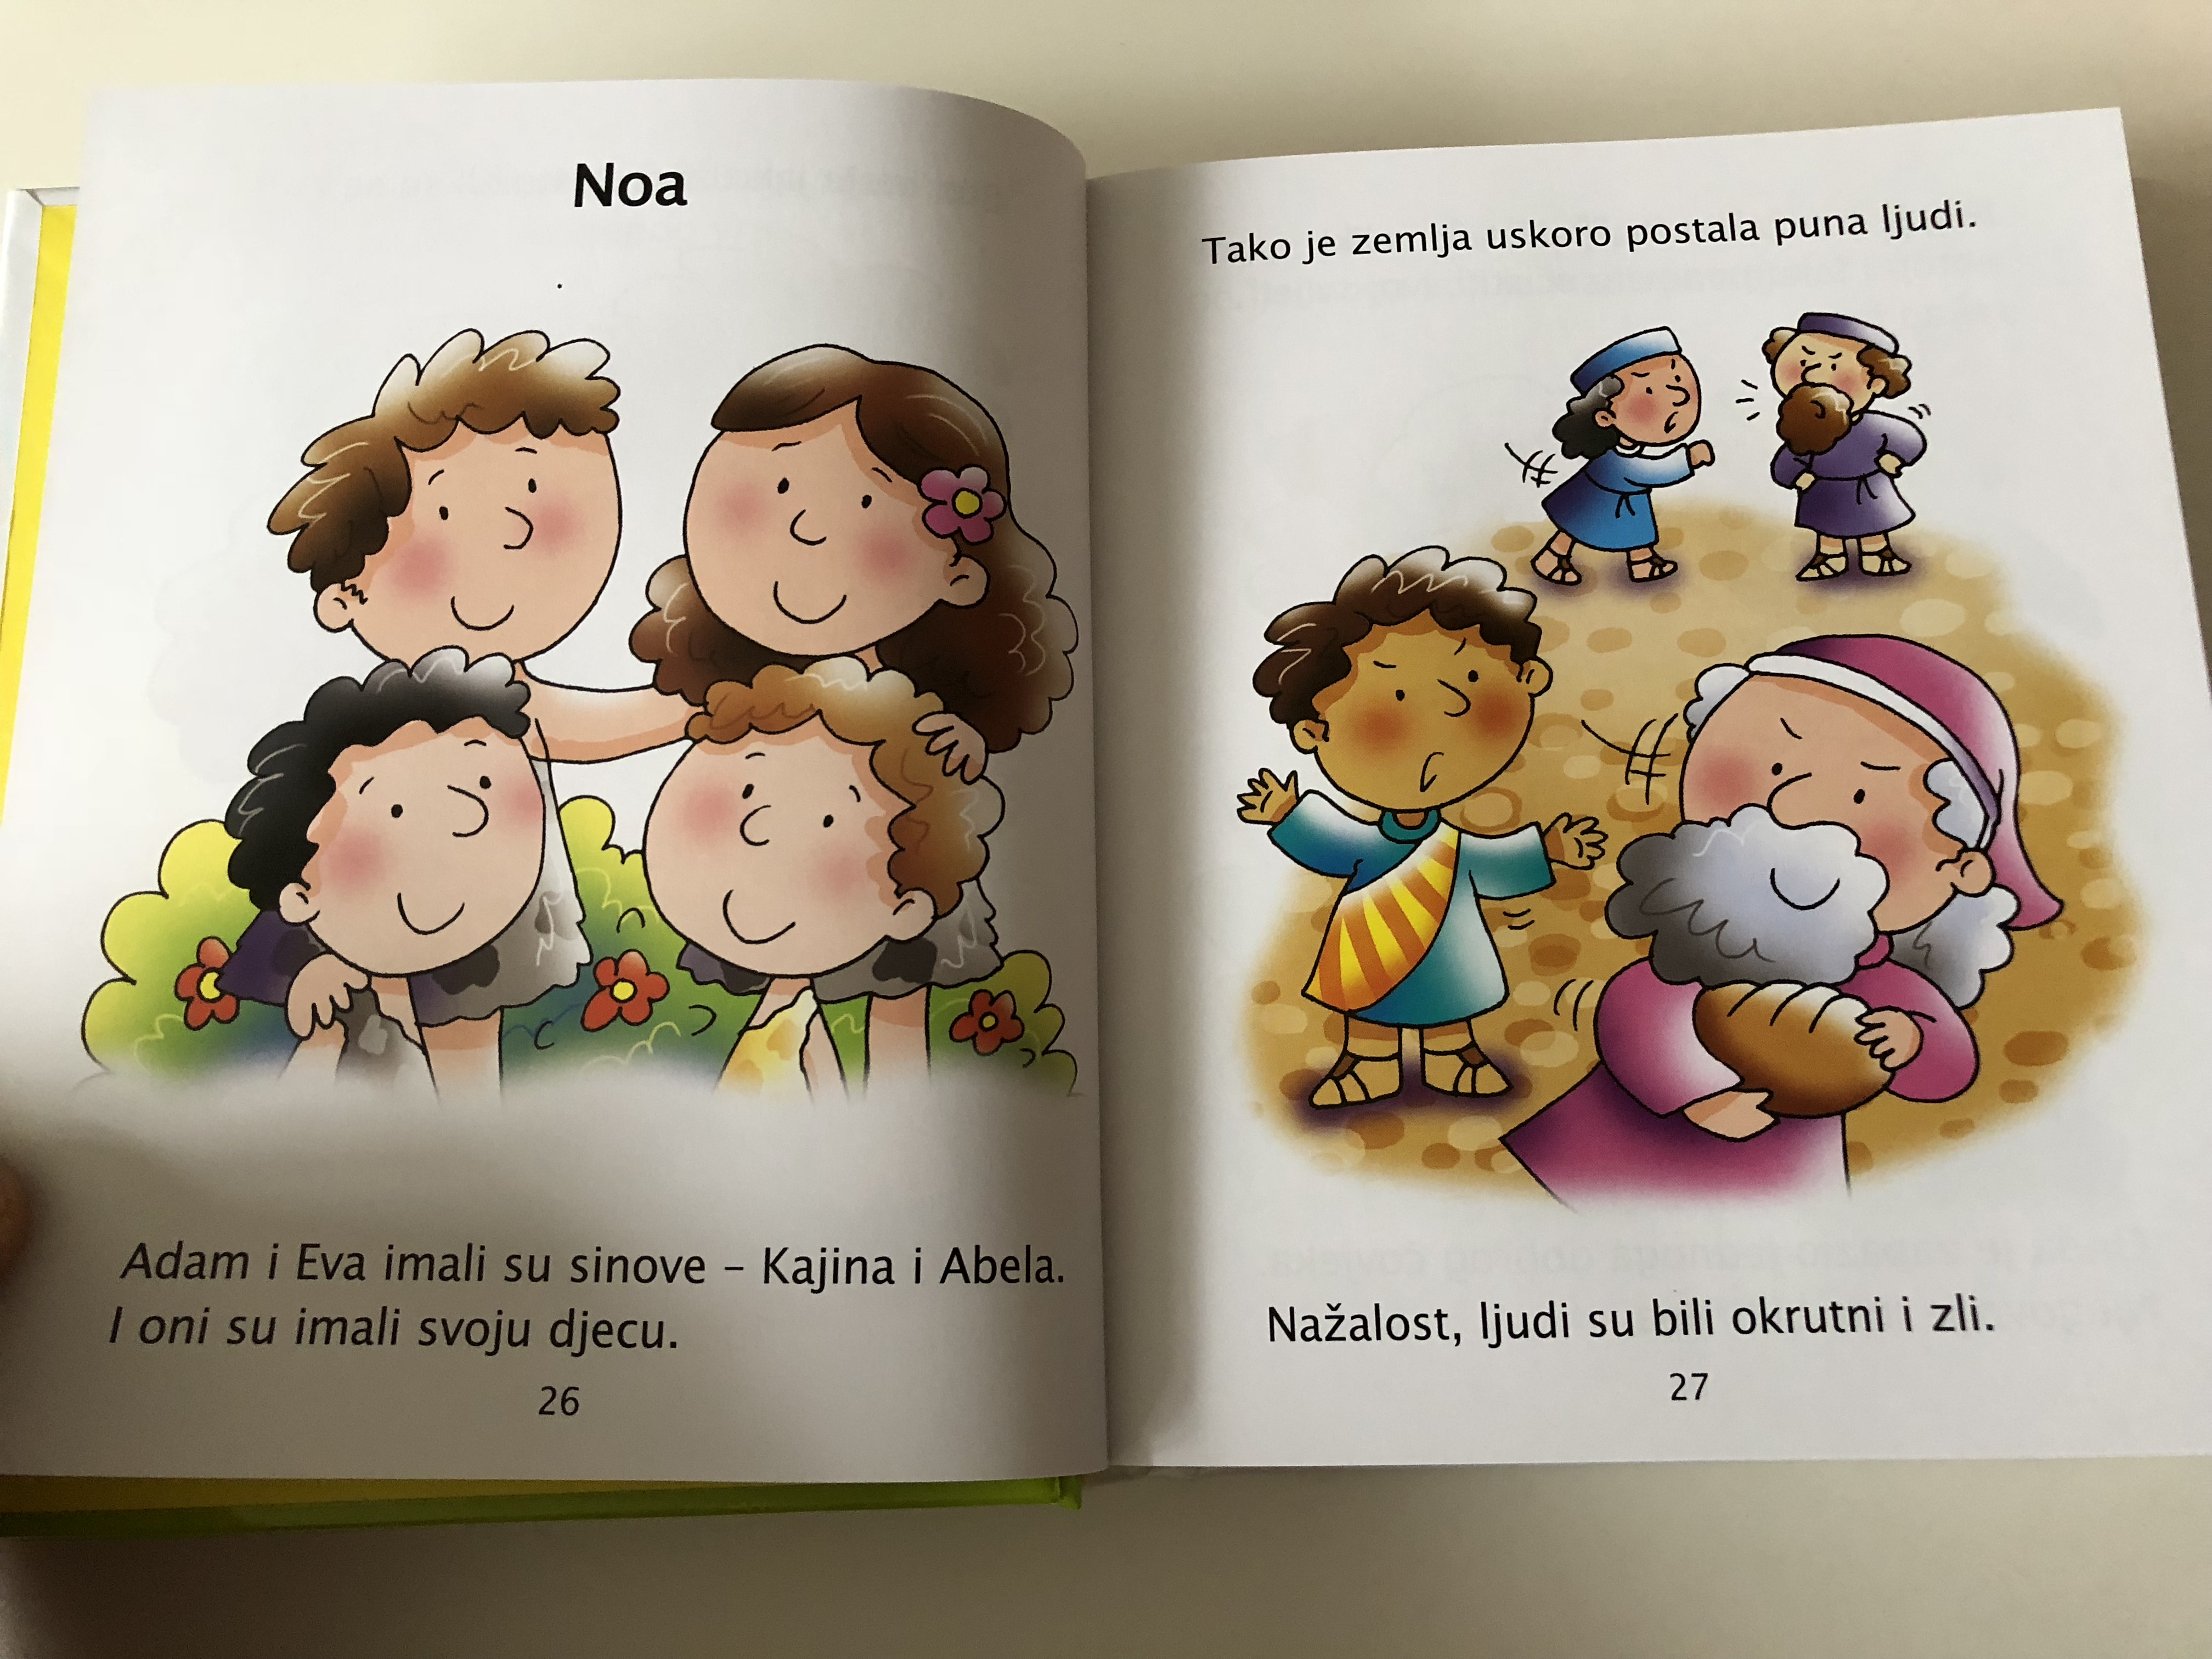 croatian-bible-for-little-ones-color-illustrated-childrens-bible-10-.jpg